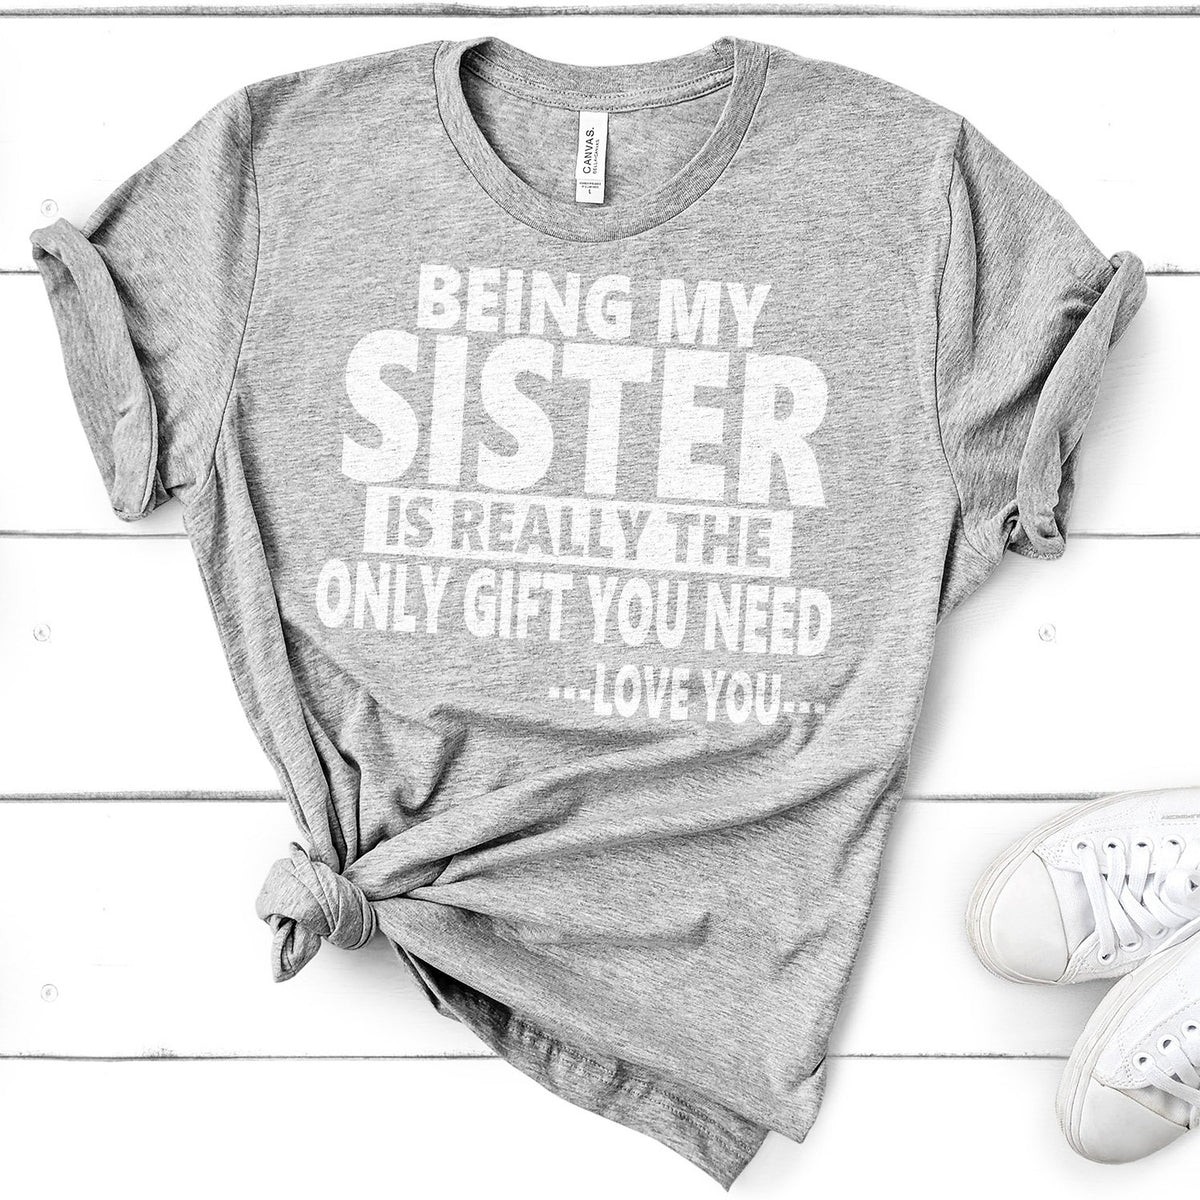 Being My Sister is Really The Only Gift You Need...Love You... - Short Sleeve Tee Shirt